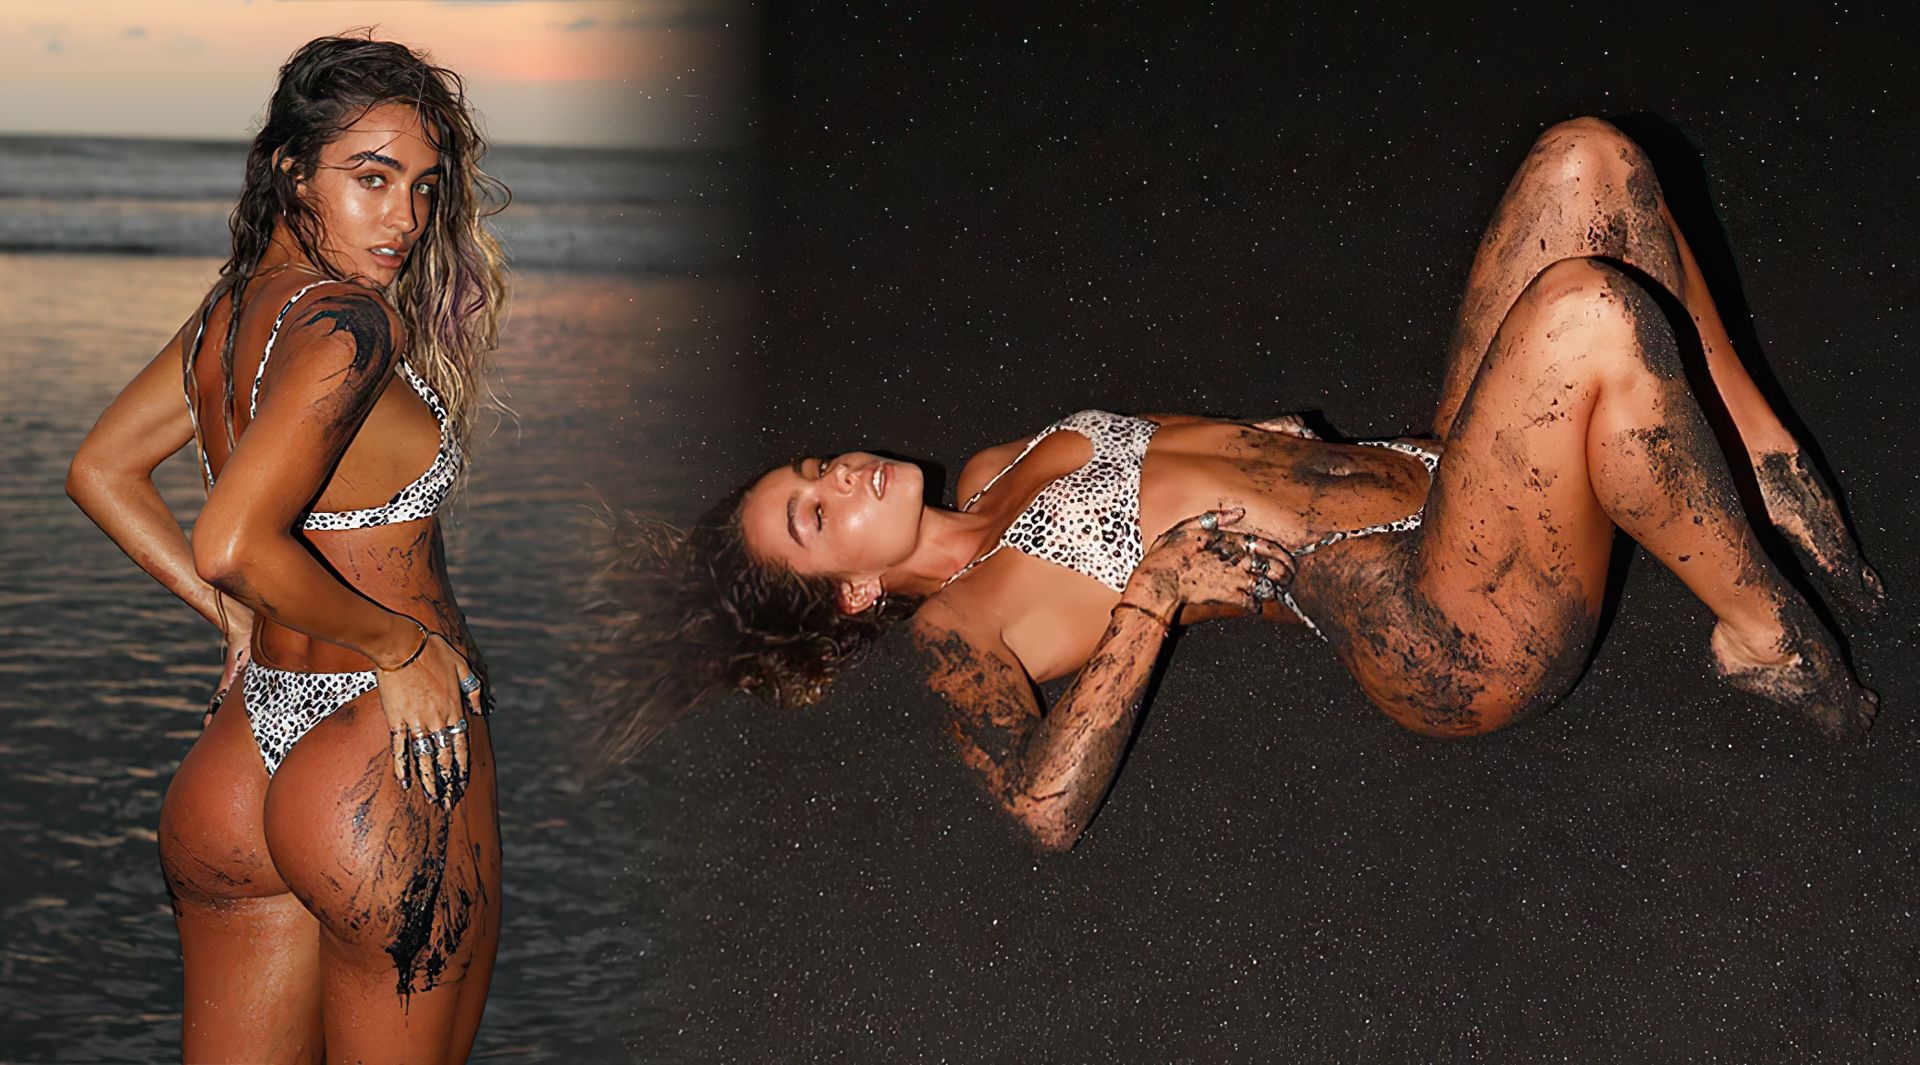 Tittyless fitness model Sommer Ray poses in a bikini on the beach in a new photoshoot...